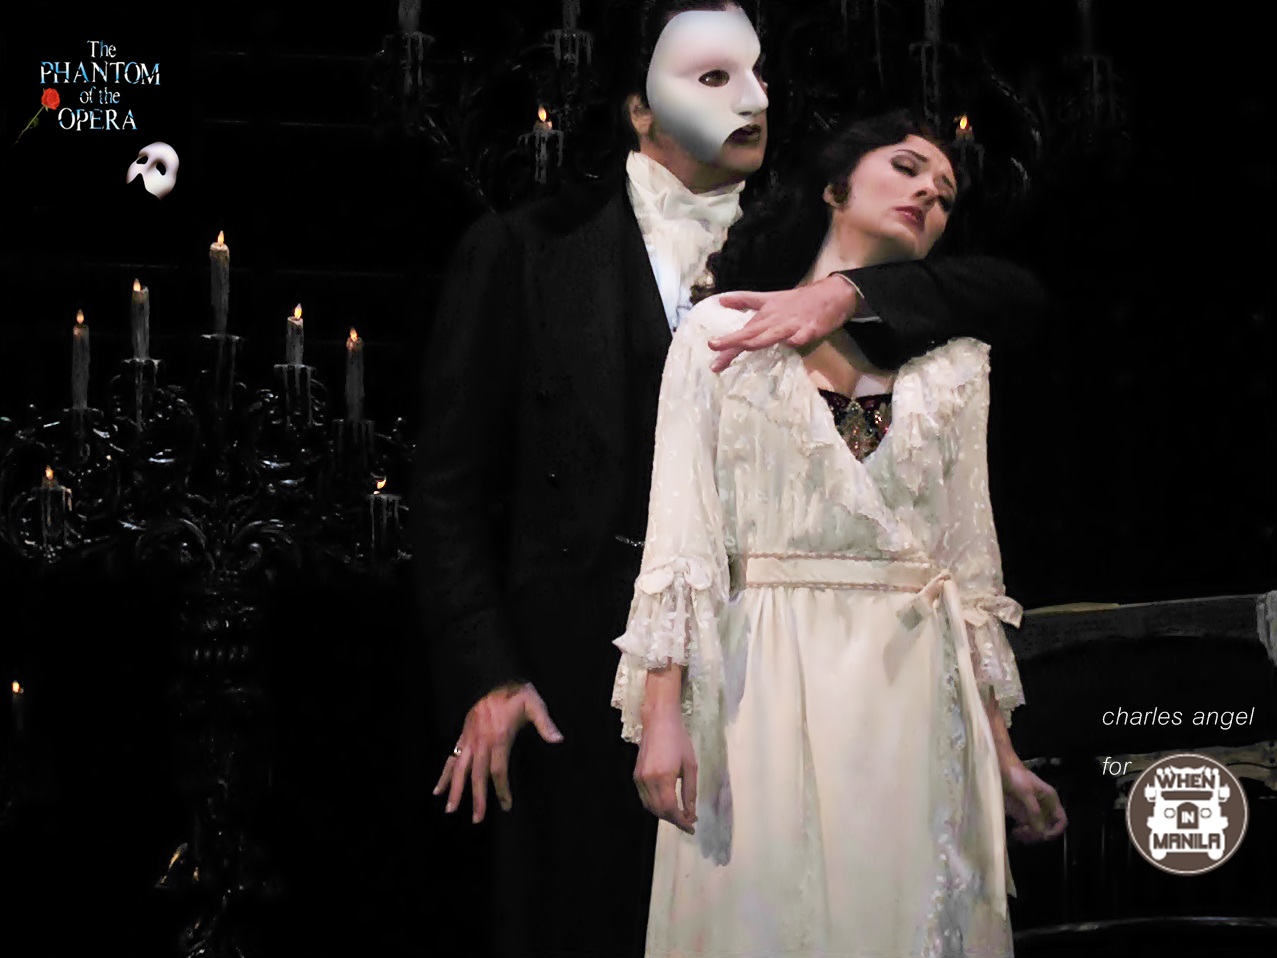 THE PHANTOM OF THE OPERA MEDIA MUSICAL MEDIA PREVIEW REVIEW SINGAPORE WHEN IN MANILA 14